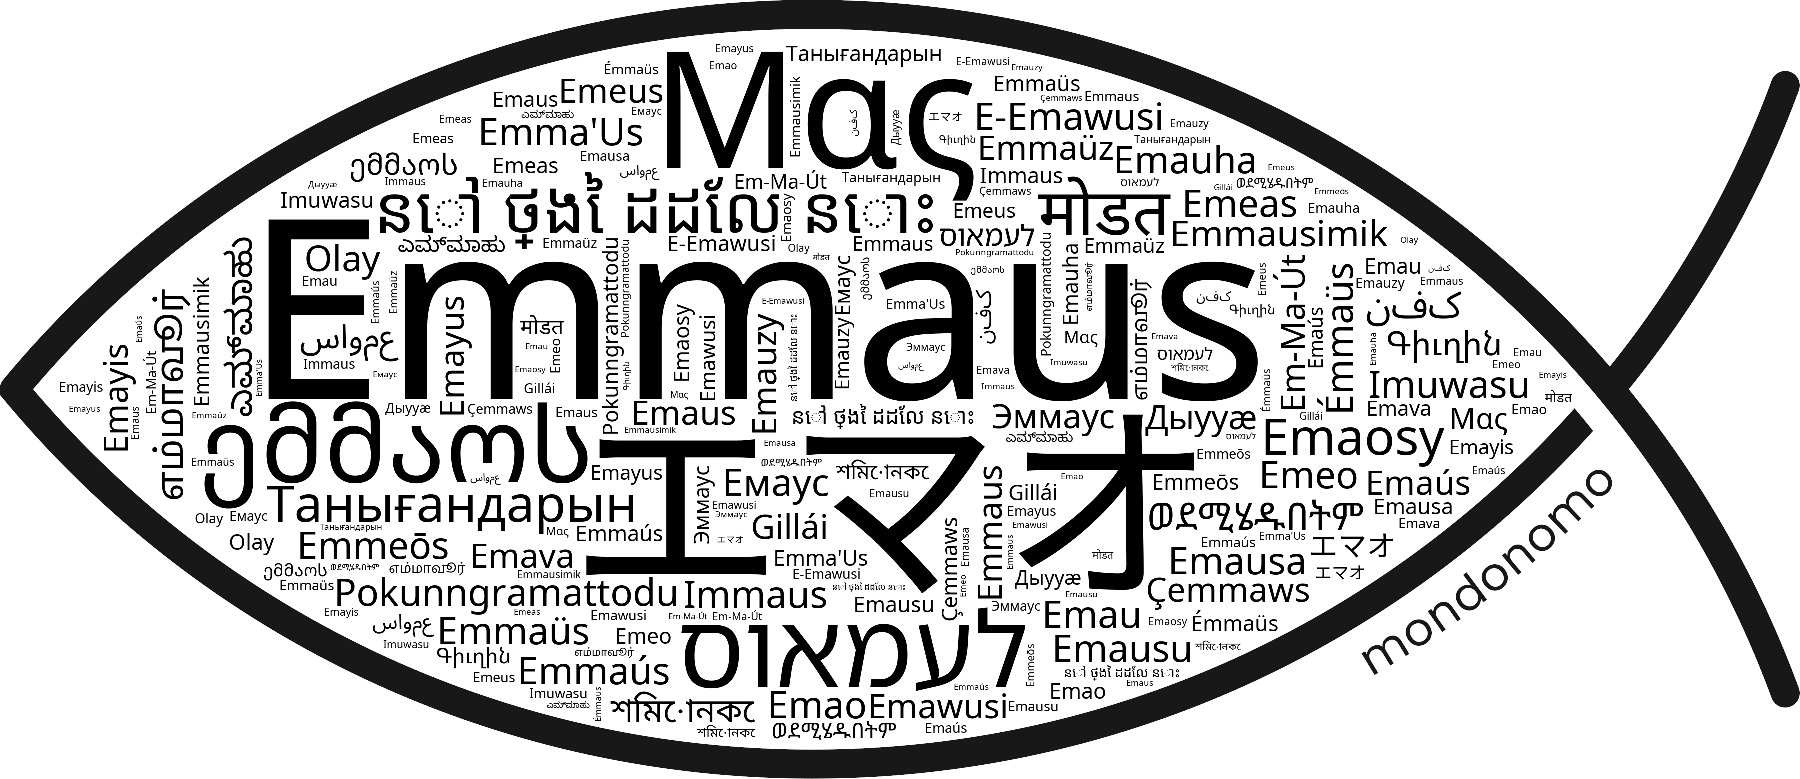 Name Emmaus in the world's Bibles